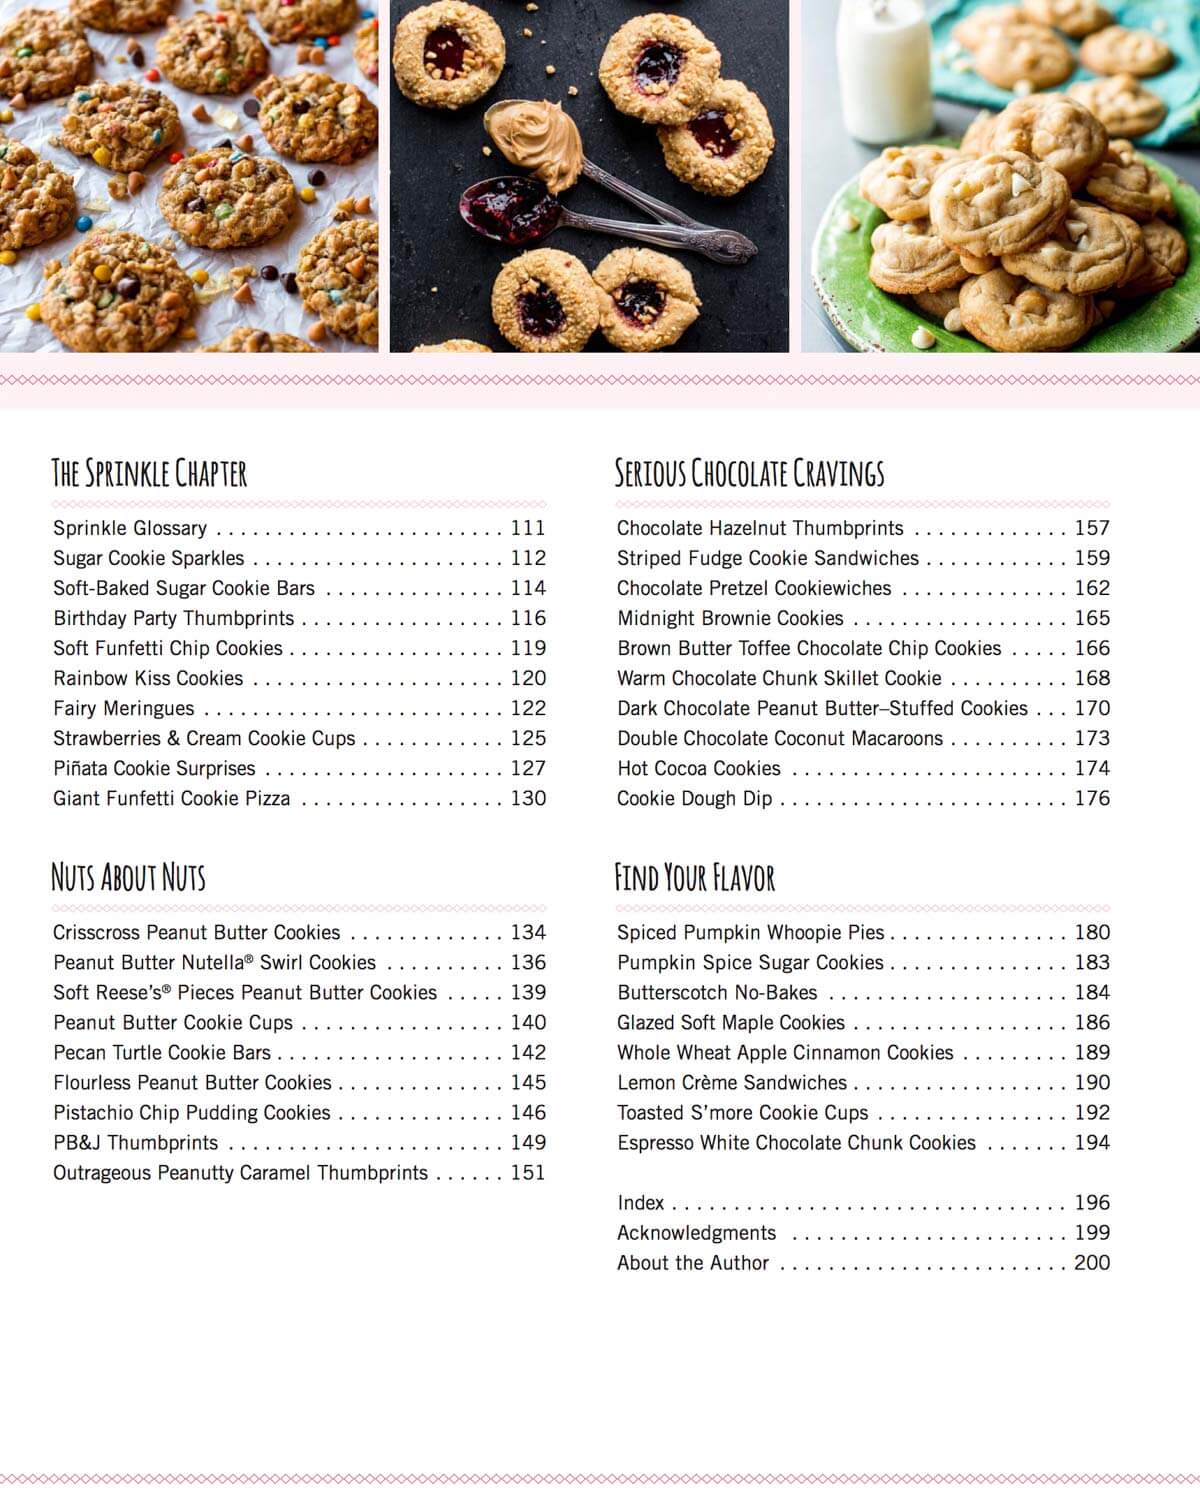 Sally's Cookie Addiction table of contents